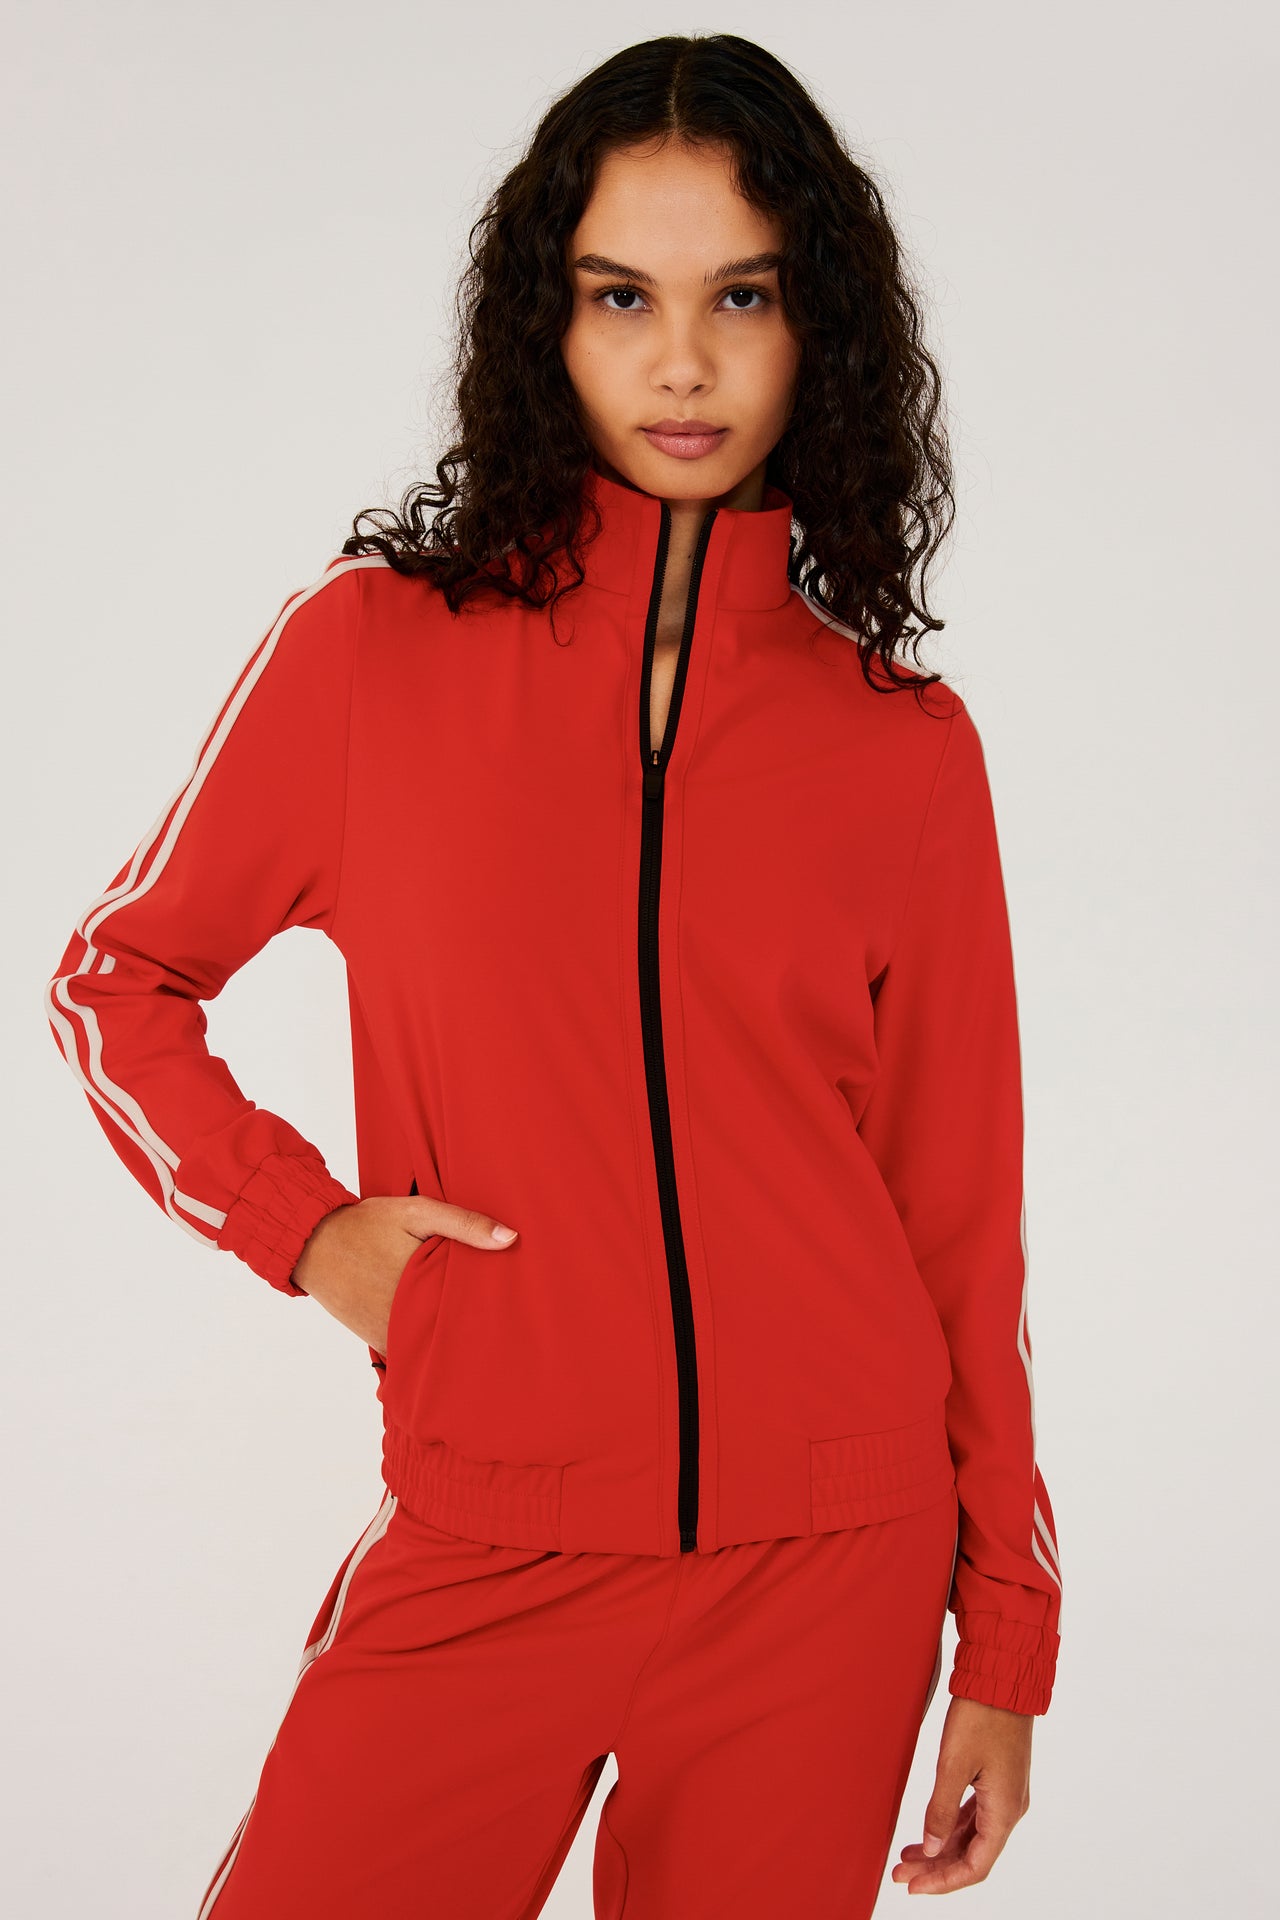 Front view of girl wearing red zip jacket that stops under chin with two white stripes down the side and a black zipper in the front with a red sweatpants